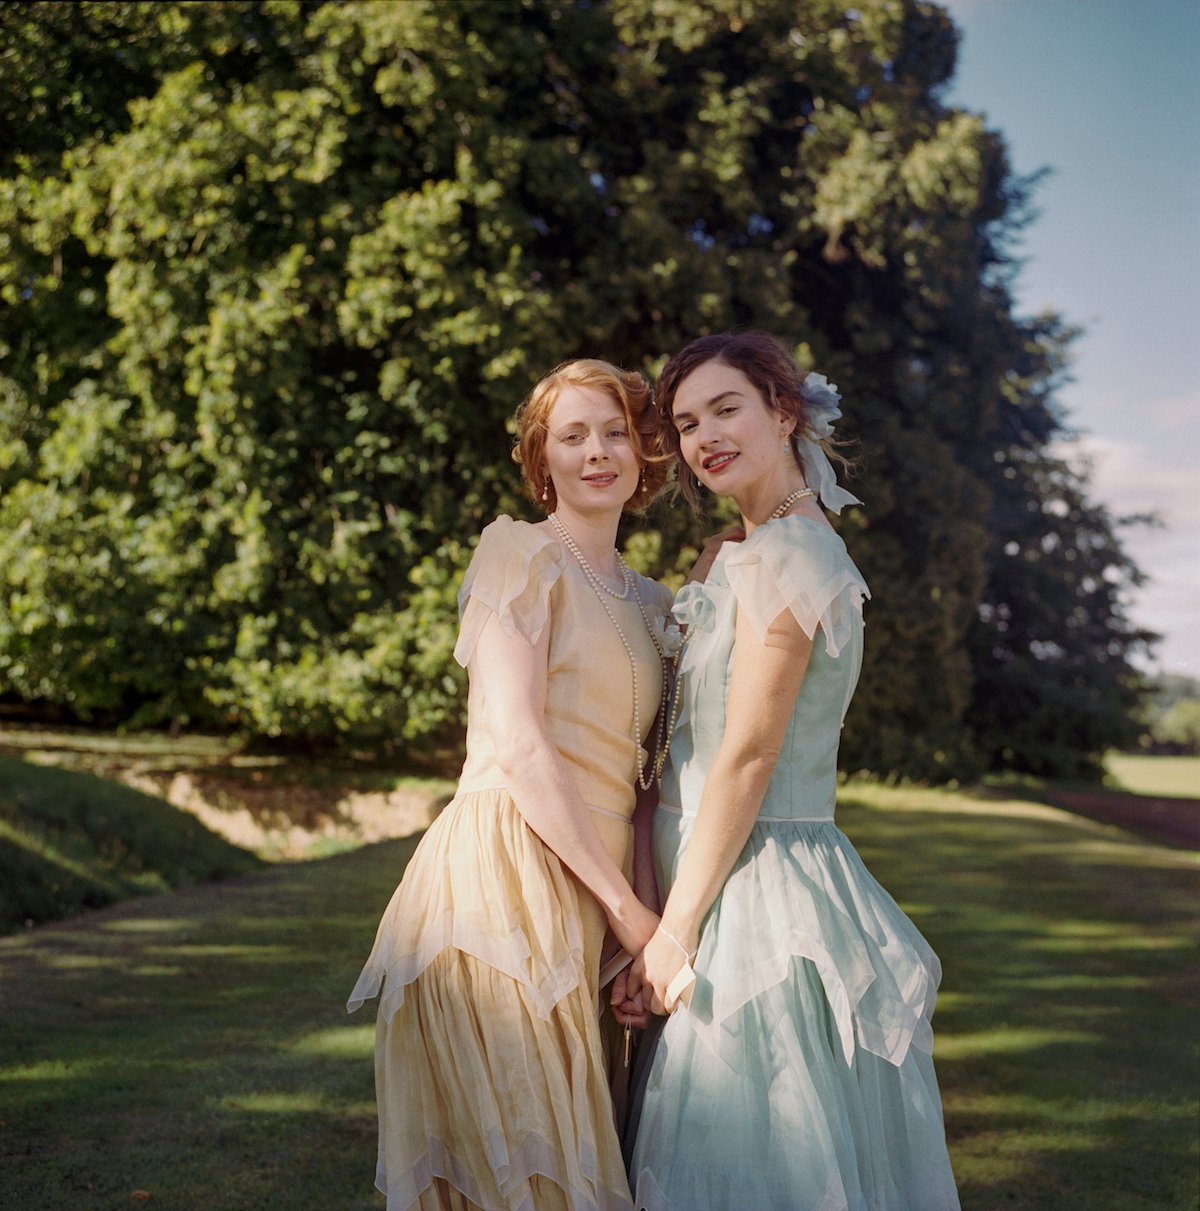 Emily Beecham as Fanny and Lily James as Linda, holding hands, in 'The Pursuit of Love'